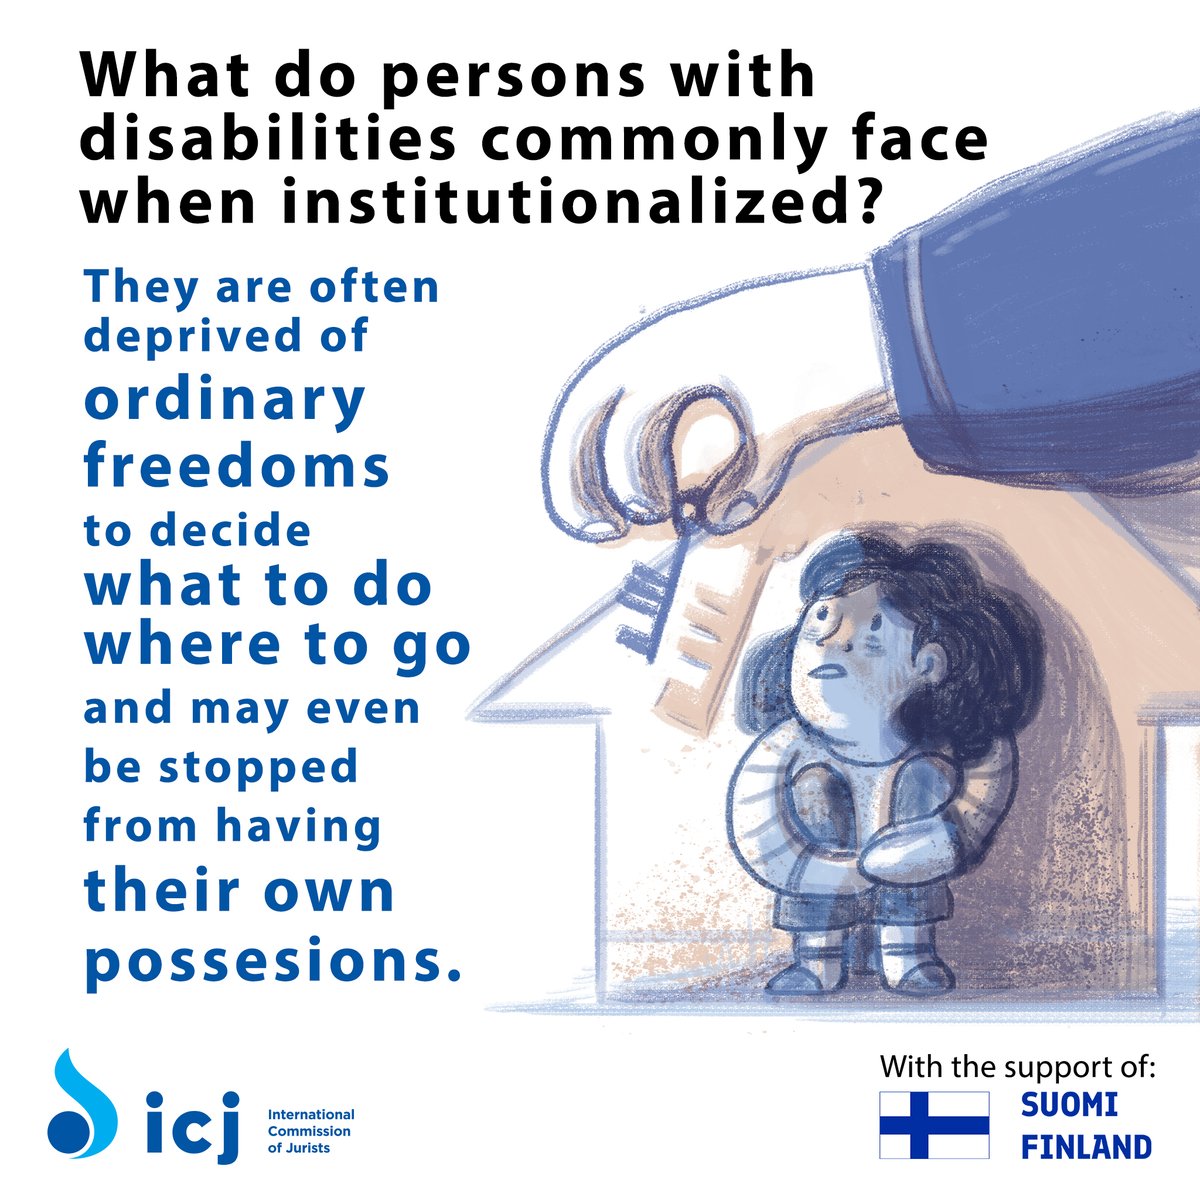 1/2 ❓ Ever wondered about the realities faced by institutionalized persons? The truth is deeply unsettling 😔😱😢 Persons with disabilities in institutions have shared harrowing accounts of violence, neglect, abuse, ill-treatment & torture. 💔 #disabilityrights #DIguidelines